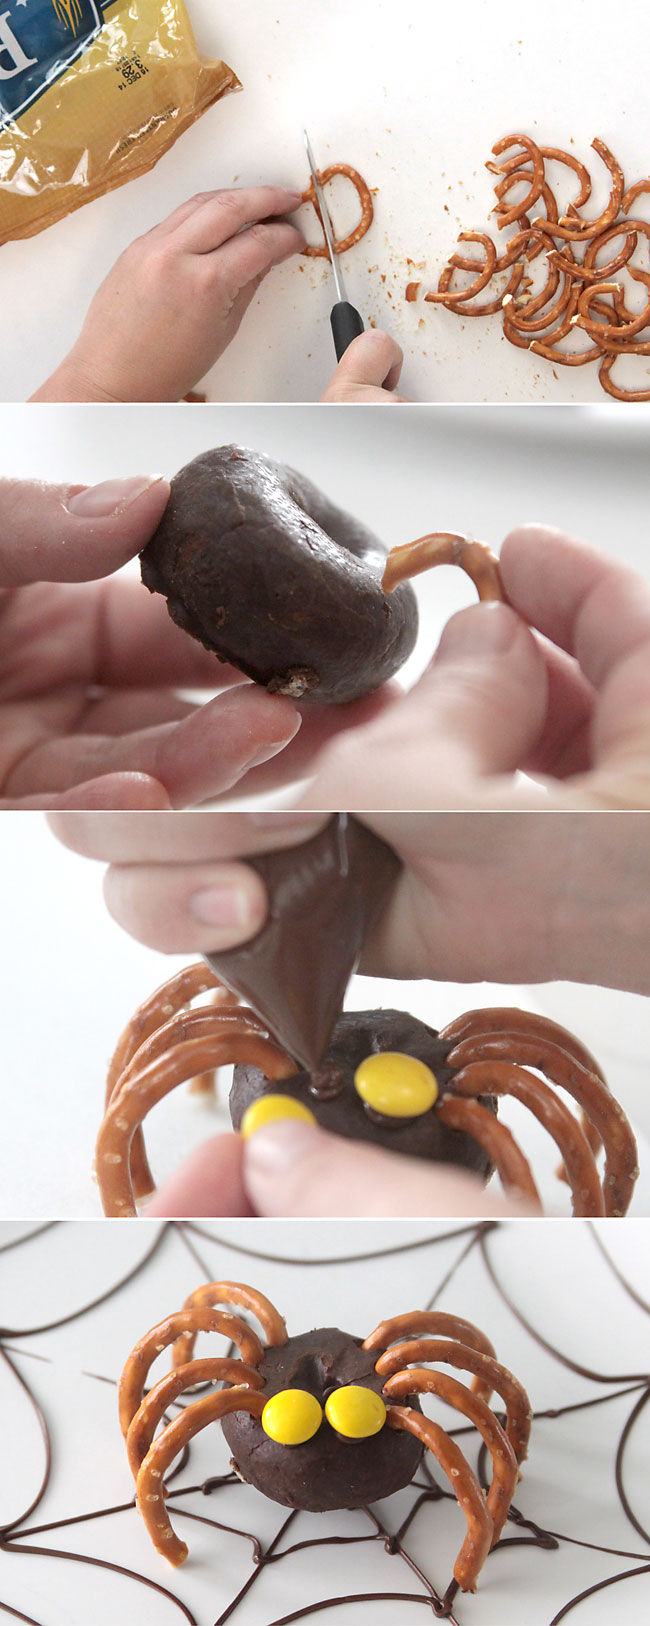 Using pieces of pretzel to make spider legs and M&Ms for eyes